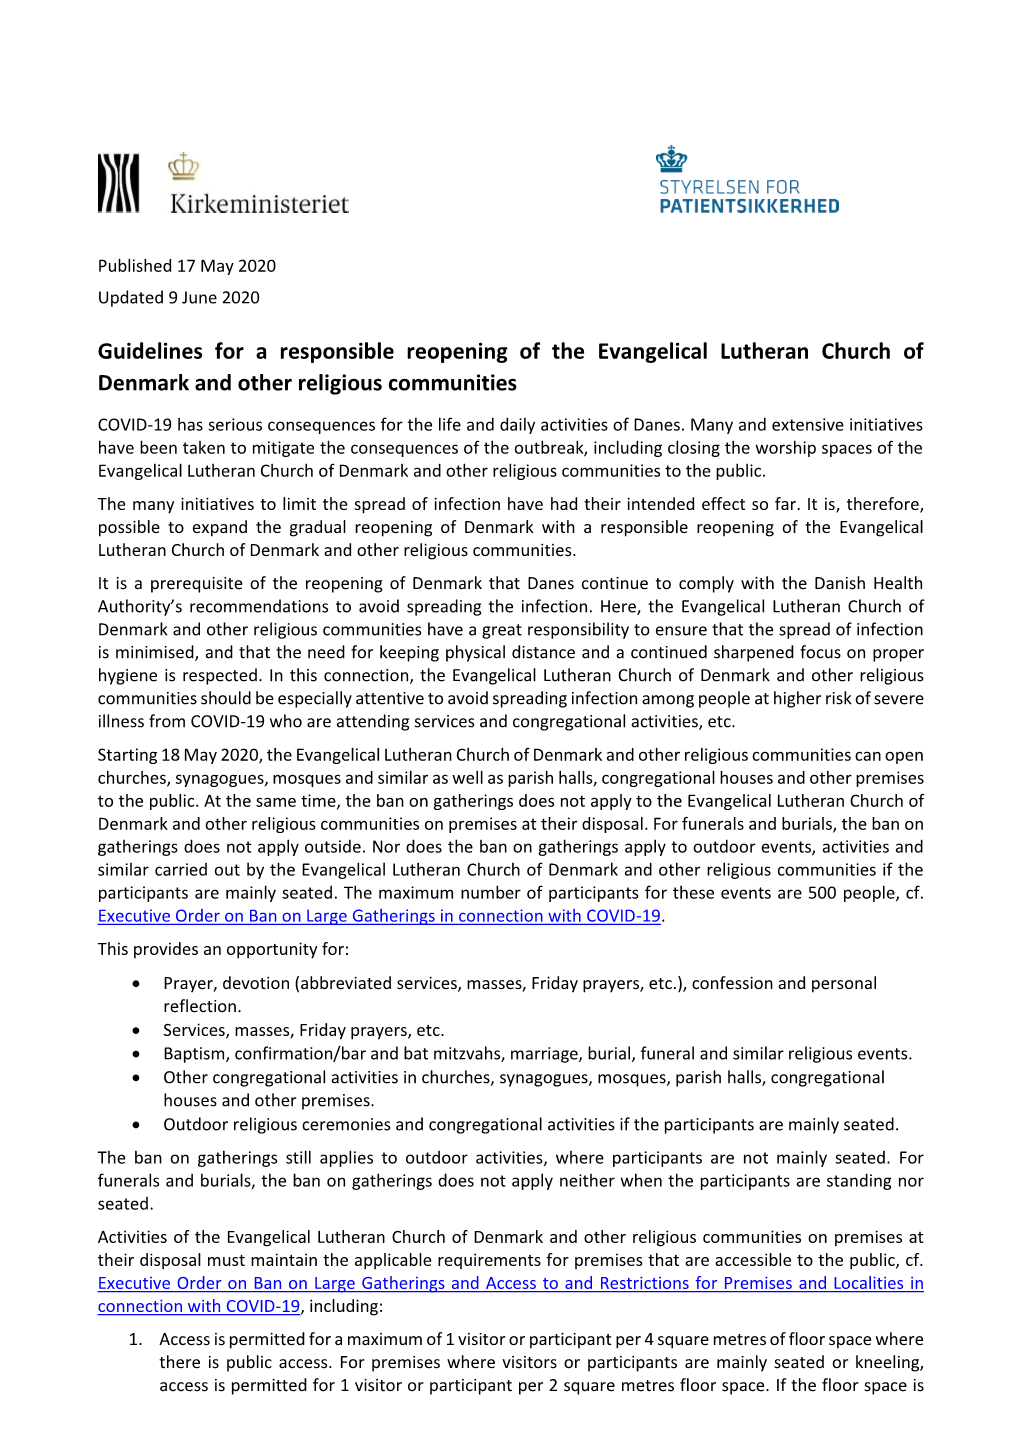 Guidelines for a Responsible Reopening of the Evangelical Lutheran Church of Denmark and Other Religious Communities